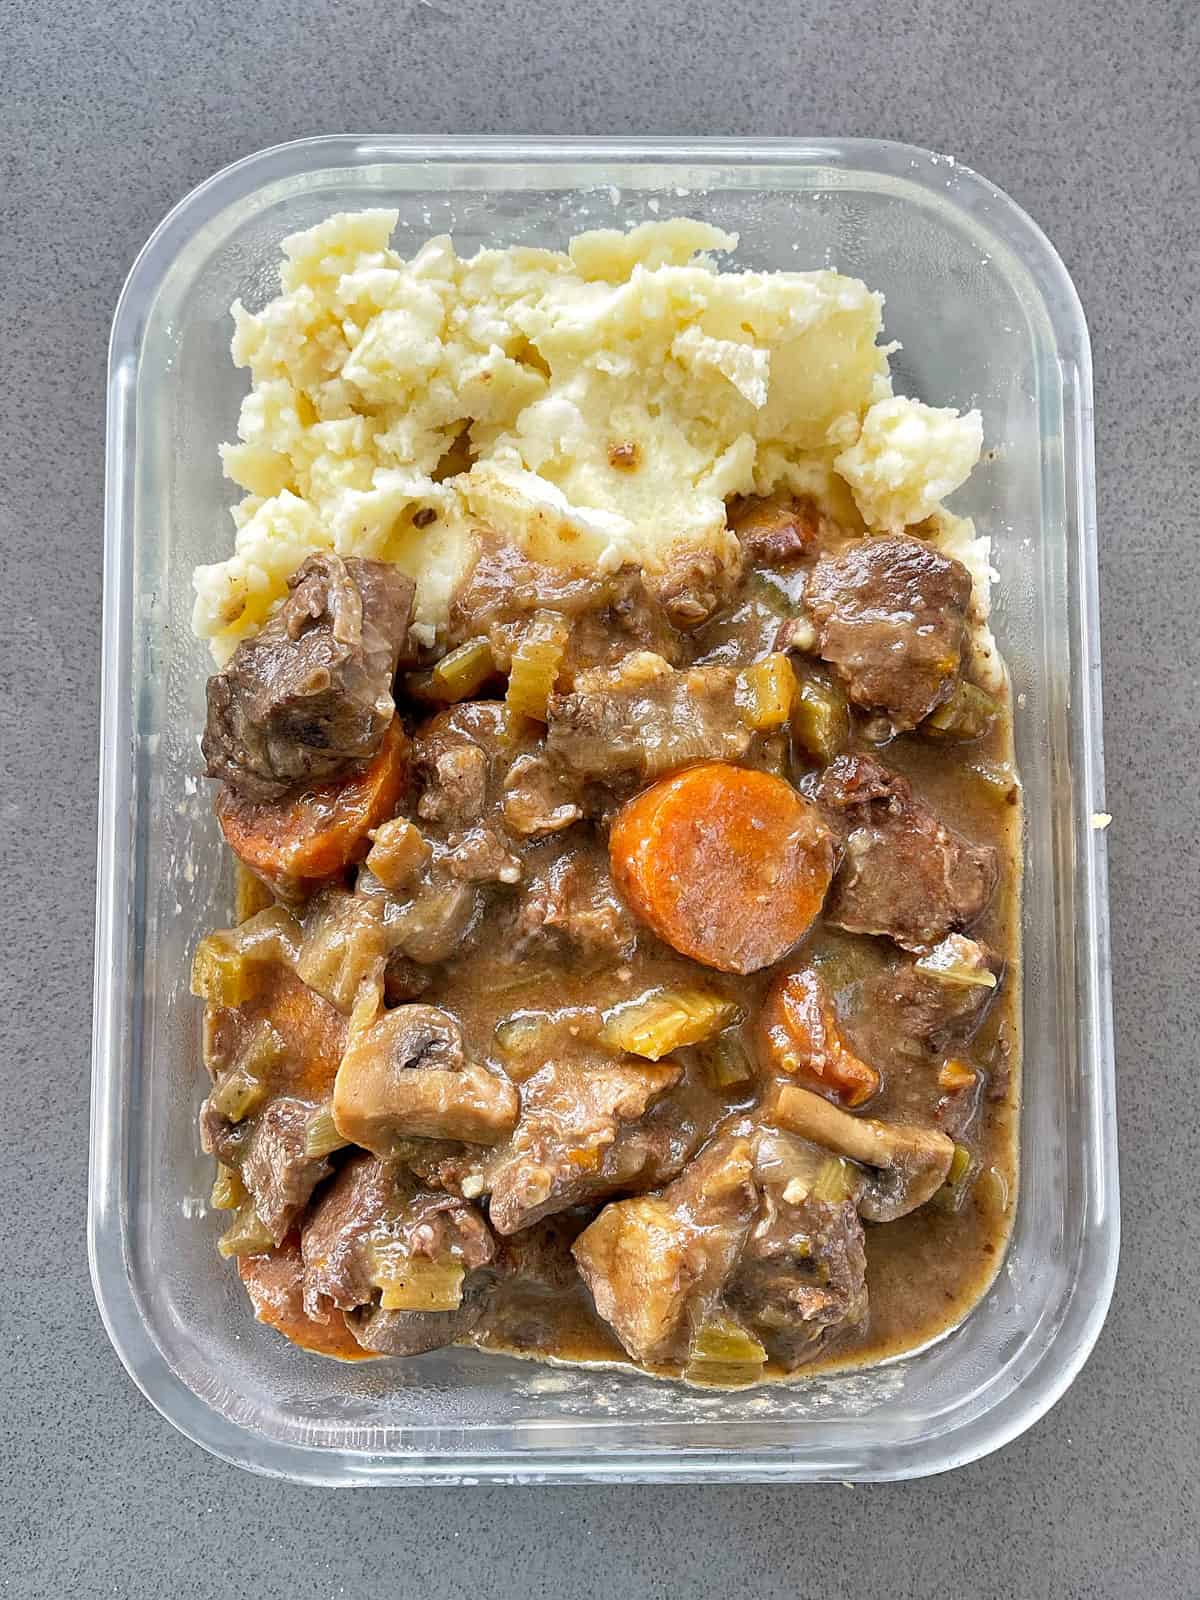 Leftover Slow Cooker Beef Stew in a glass container on a grey bench.